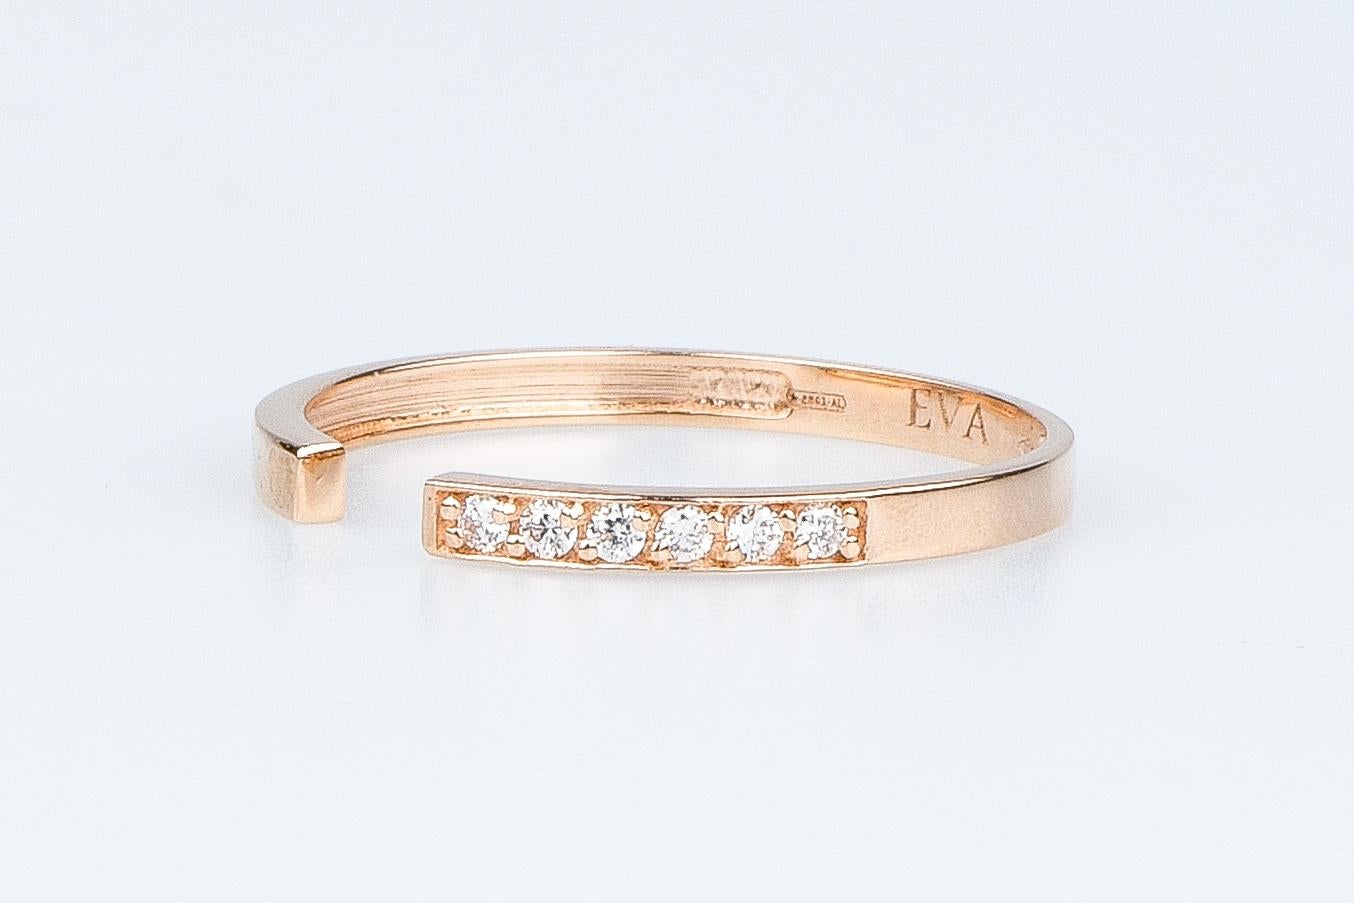 ARIA model, solid 18K pink gold ring adorned with 7 round brilliant synthetic diamonds of 0.07 carats. (0.01 ct each.)

• Carats: 0.07 ct total

• Color: DEF

• Clarity: VS

• 1 grams

• Available sizes (EU): 49 to 56, free size adjustment.

•